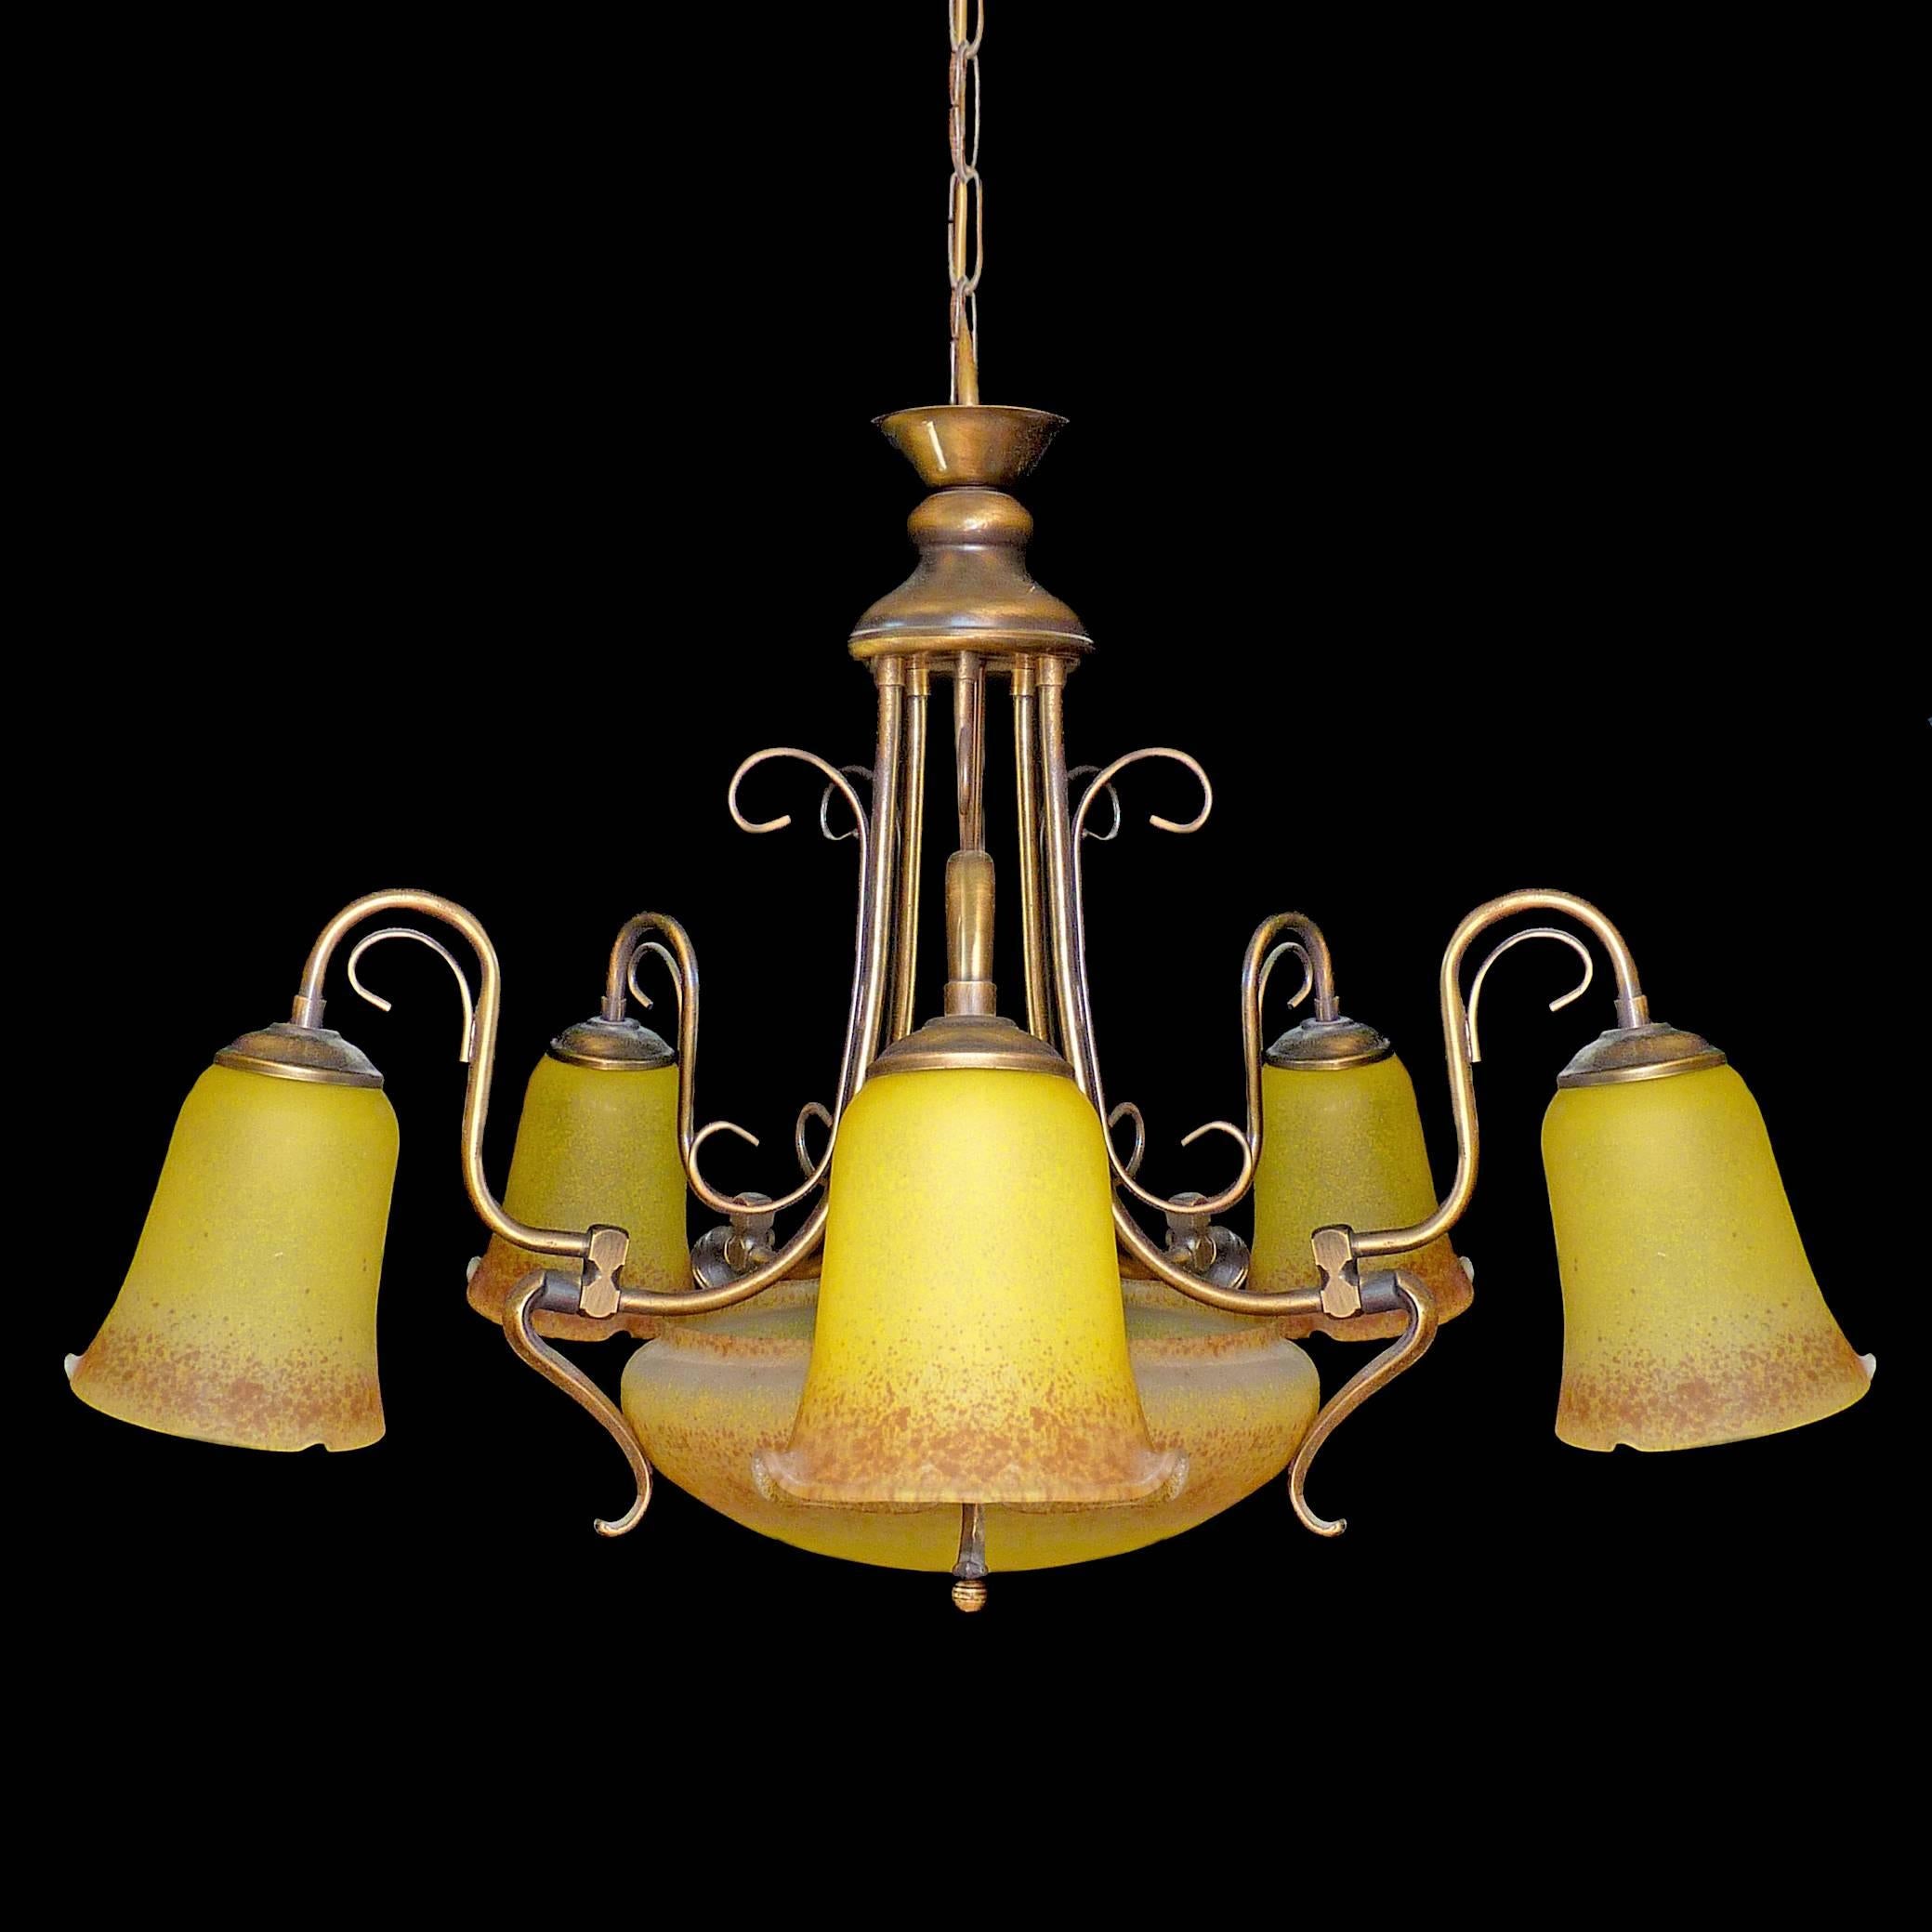 20th Century Large French Art Deco and Art Nouveau Amber Art Glass and Brass Chandelier For Sale